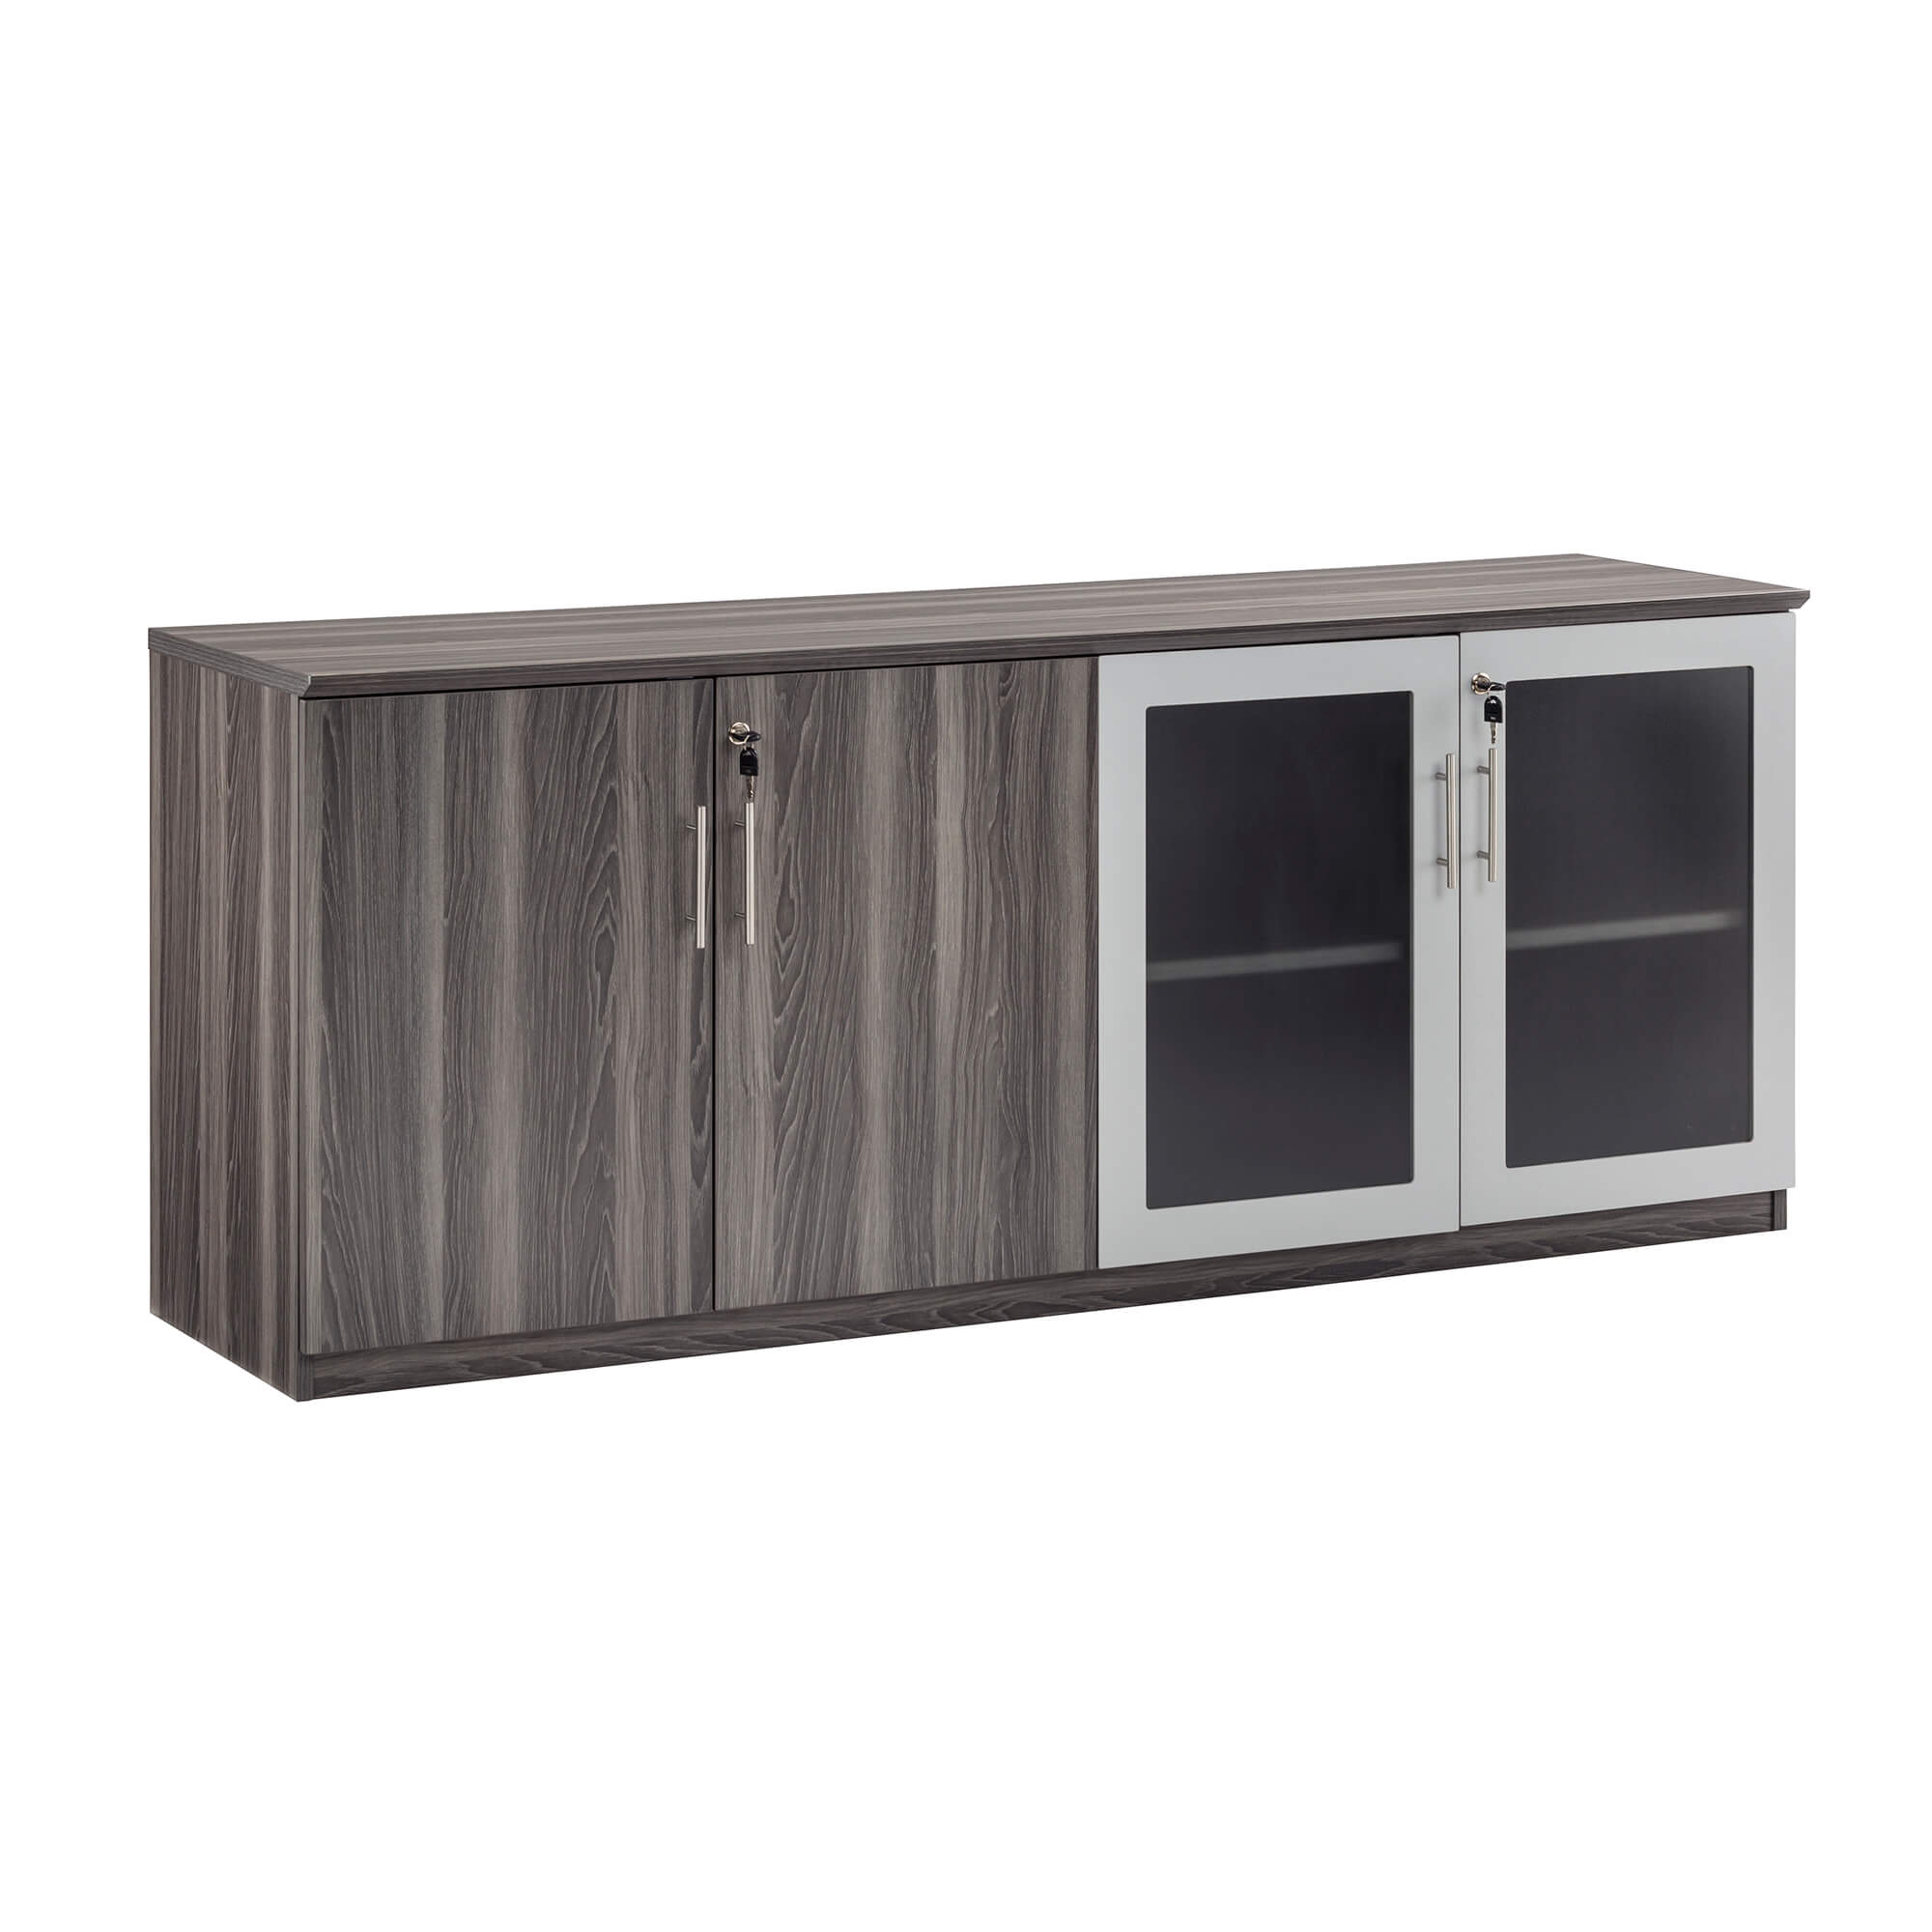 Conference room storage and accessories CUB MVLCLGS FAS